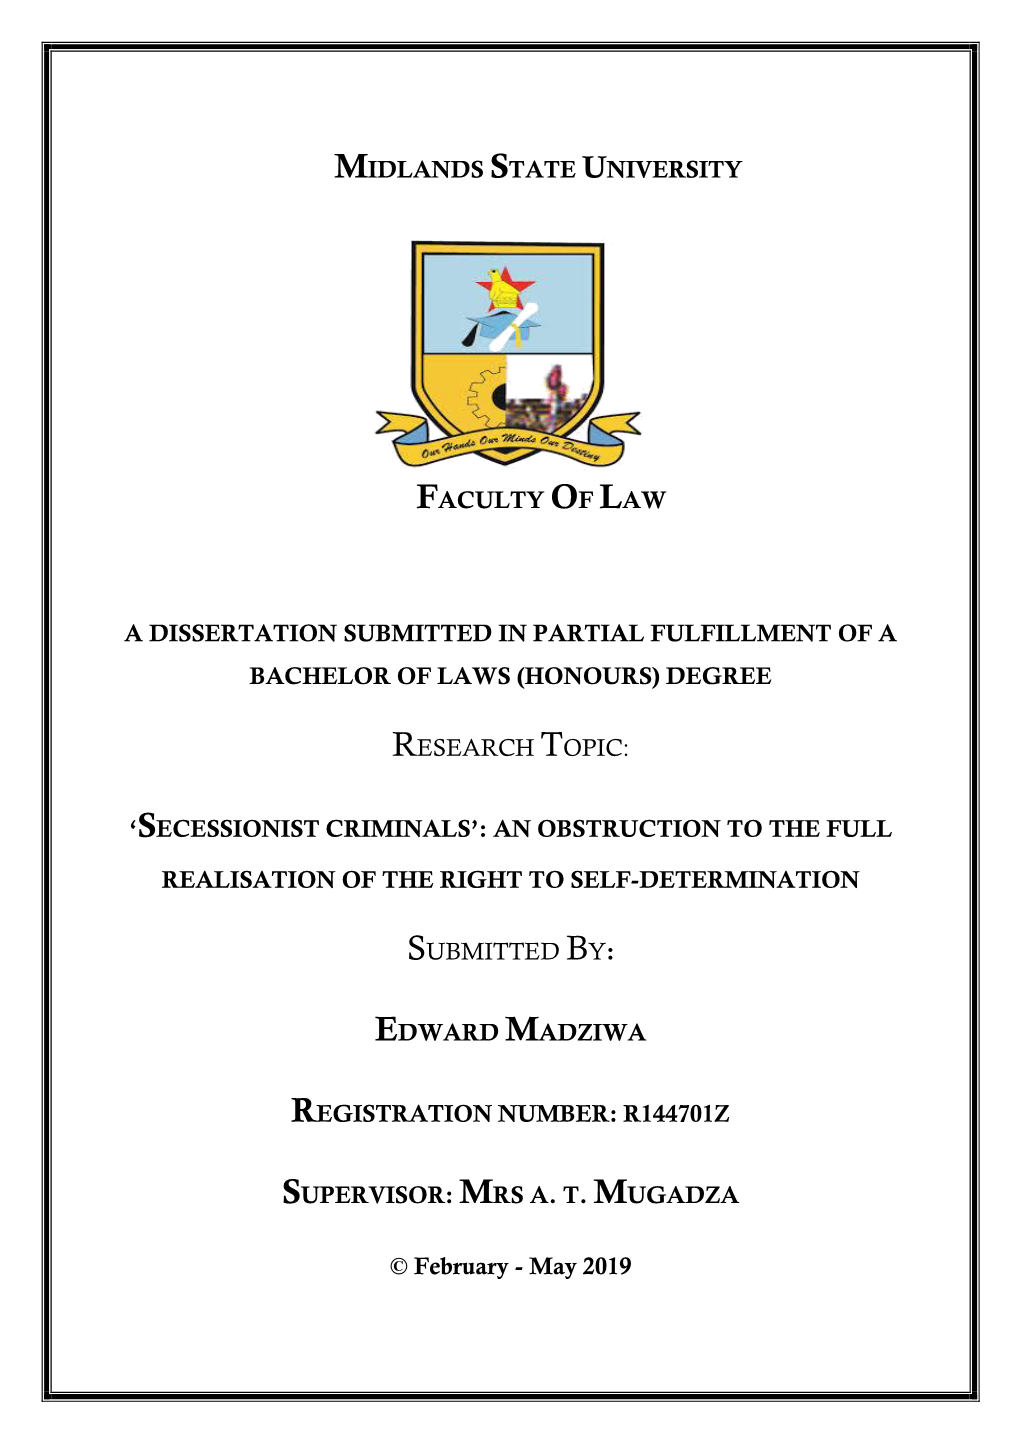 Midlands State University Faculty of Law a Dissertation Submitted in Partial Fulfillment of a Bachelor of Laws (Honours) Degree